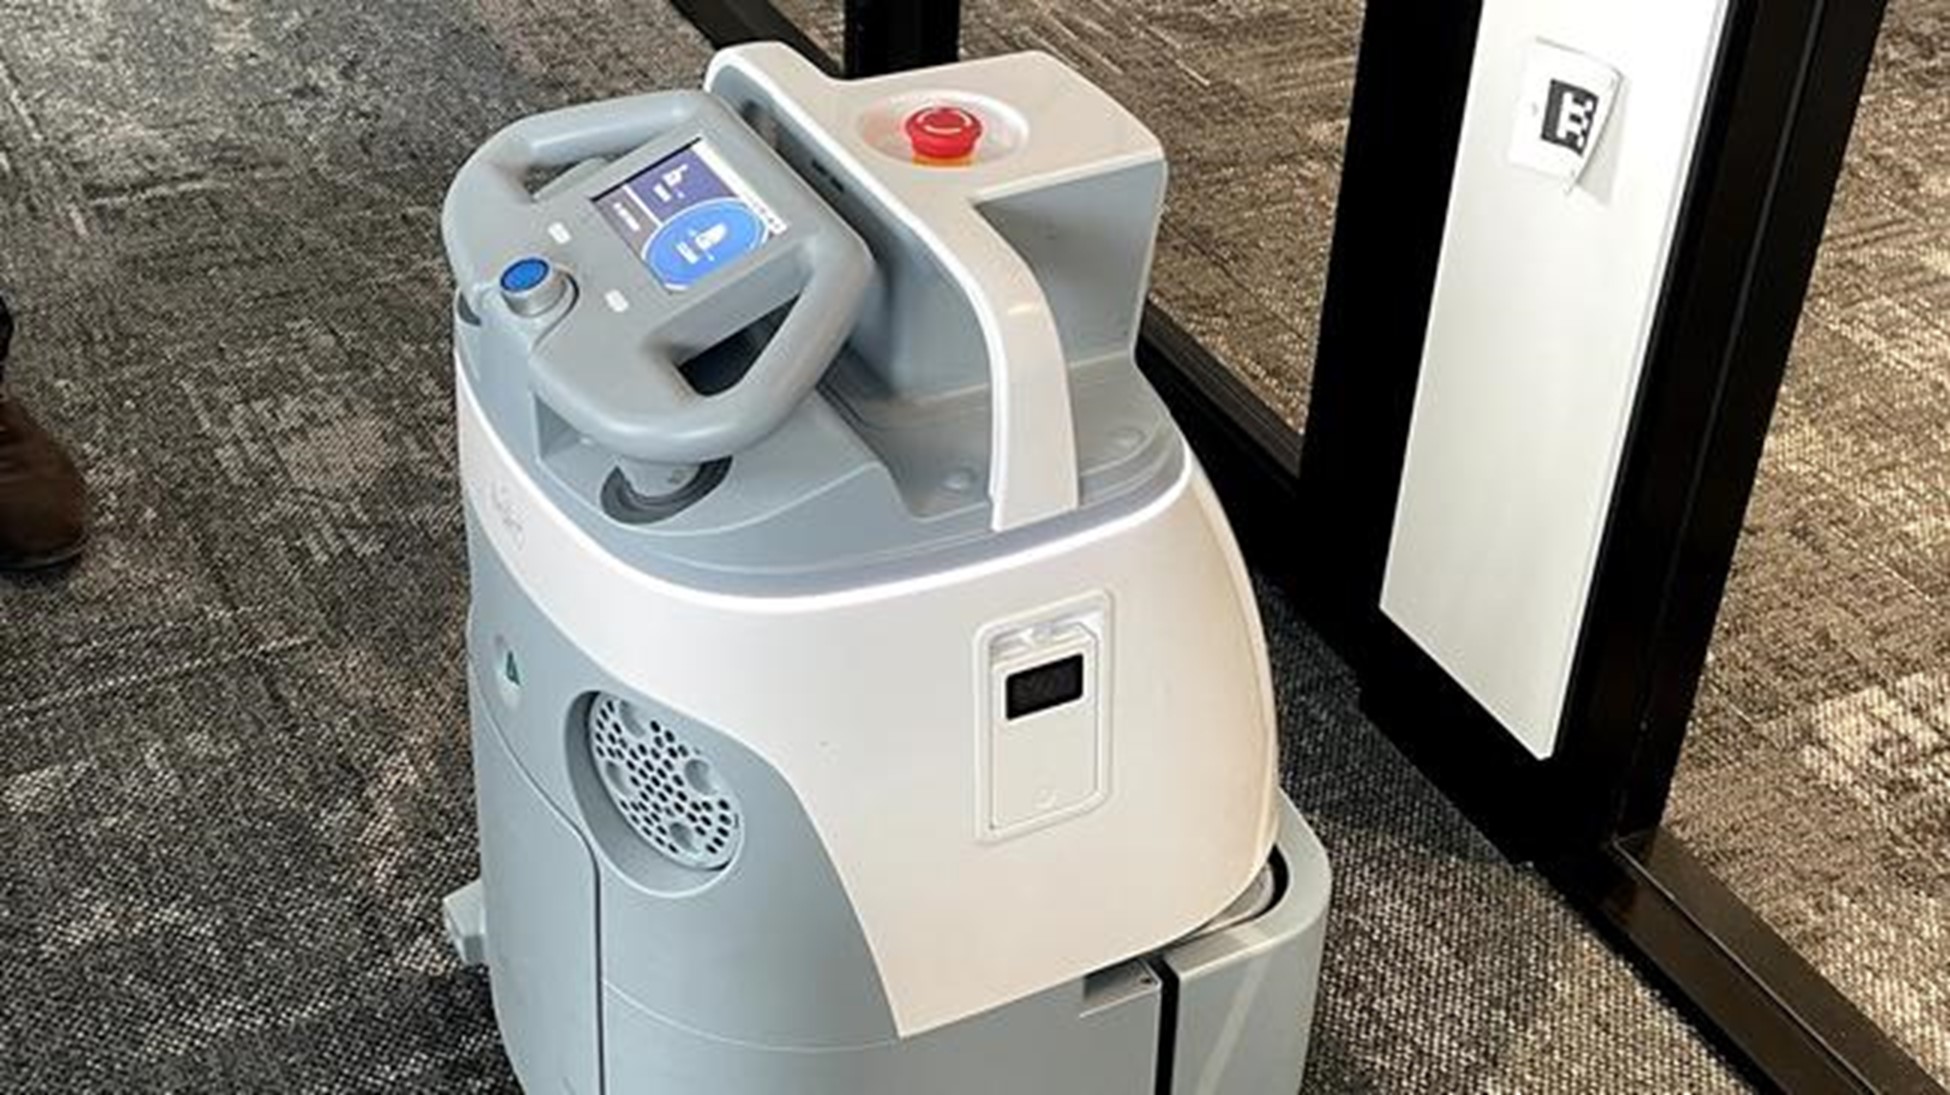 SoftBank Robotics aims to automate office with Whiz Industrial vacuum system - SoftBank